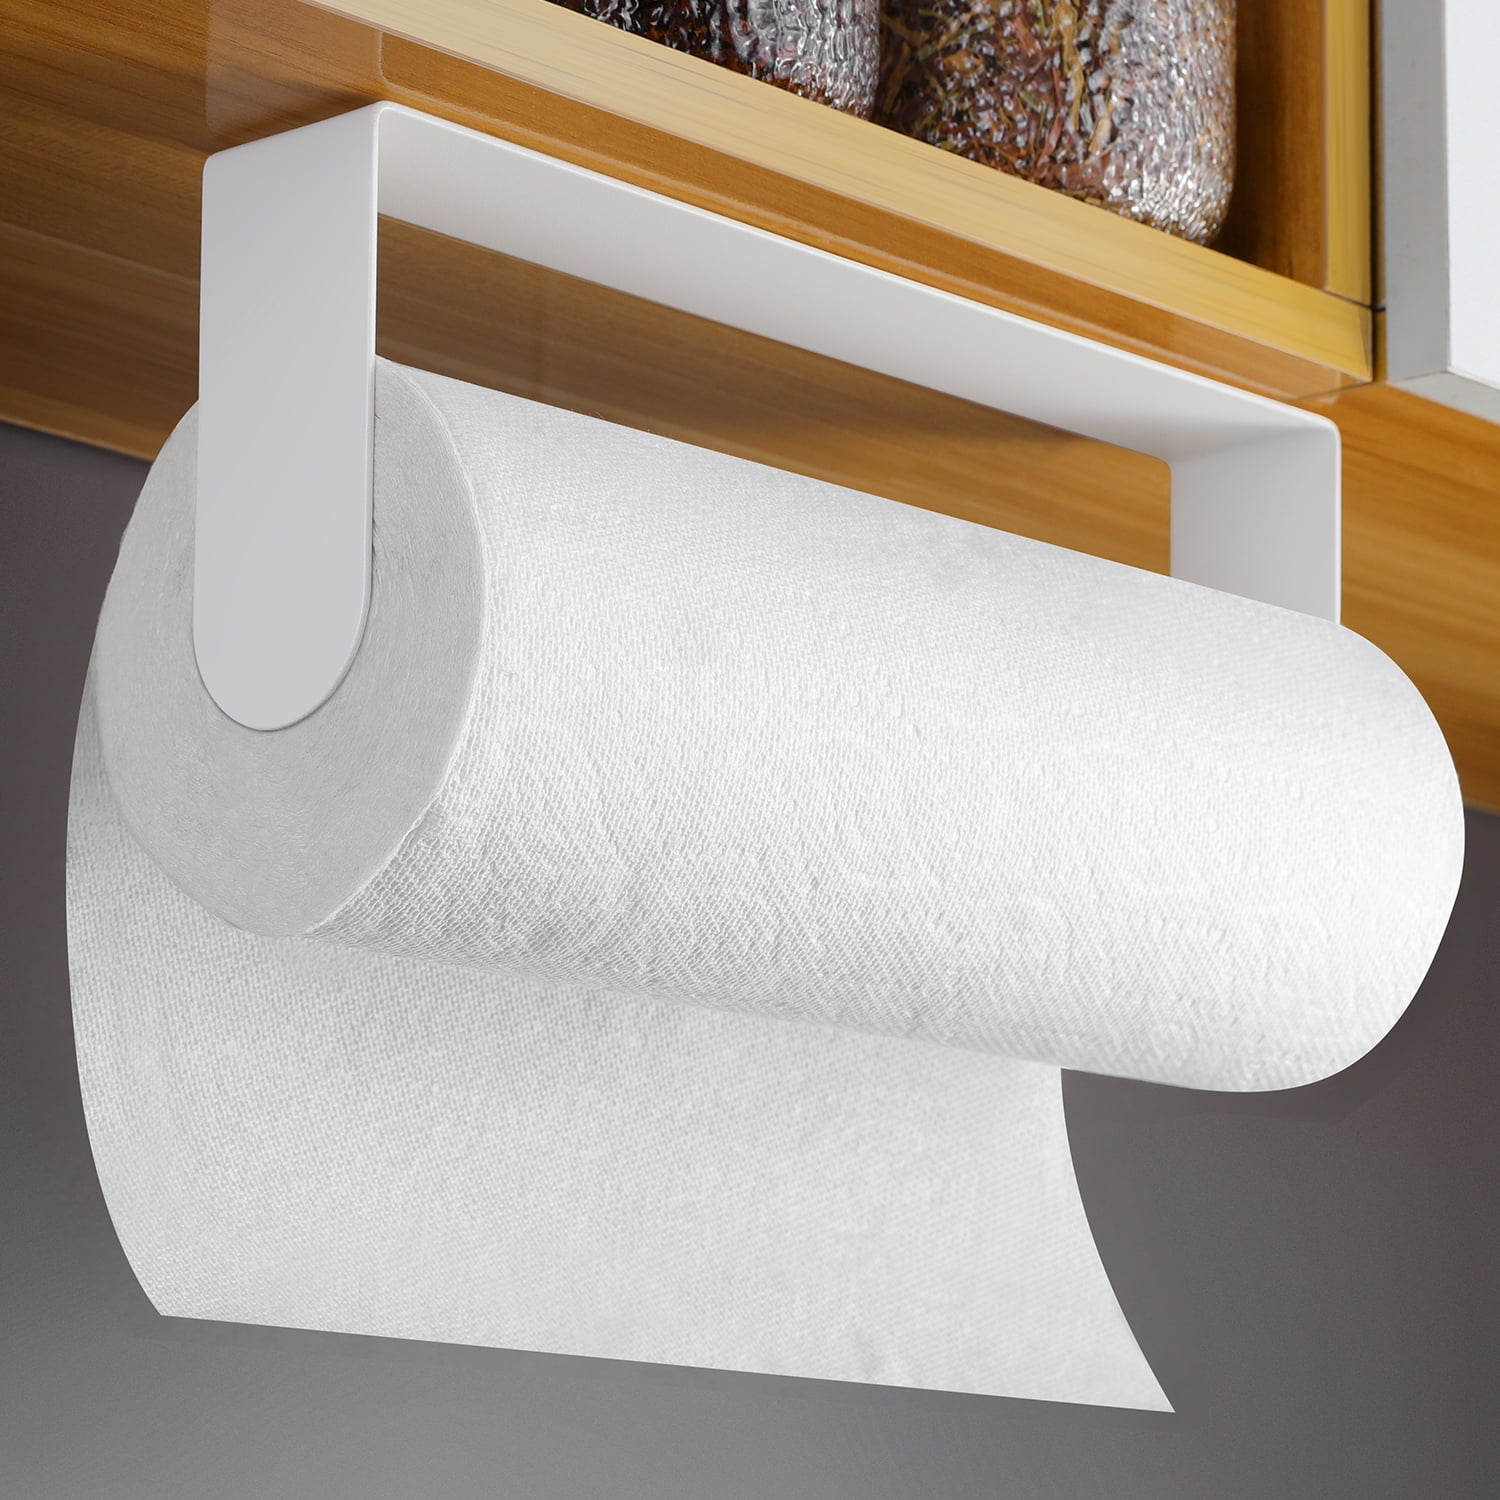 YIGII Self Adhesive Paper Towel Holder Horizontal or Vertical KH016 - Tools  for Kitchen & Bathroom